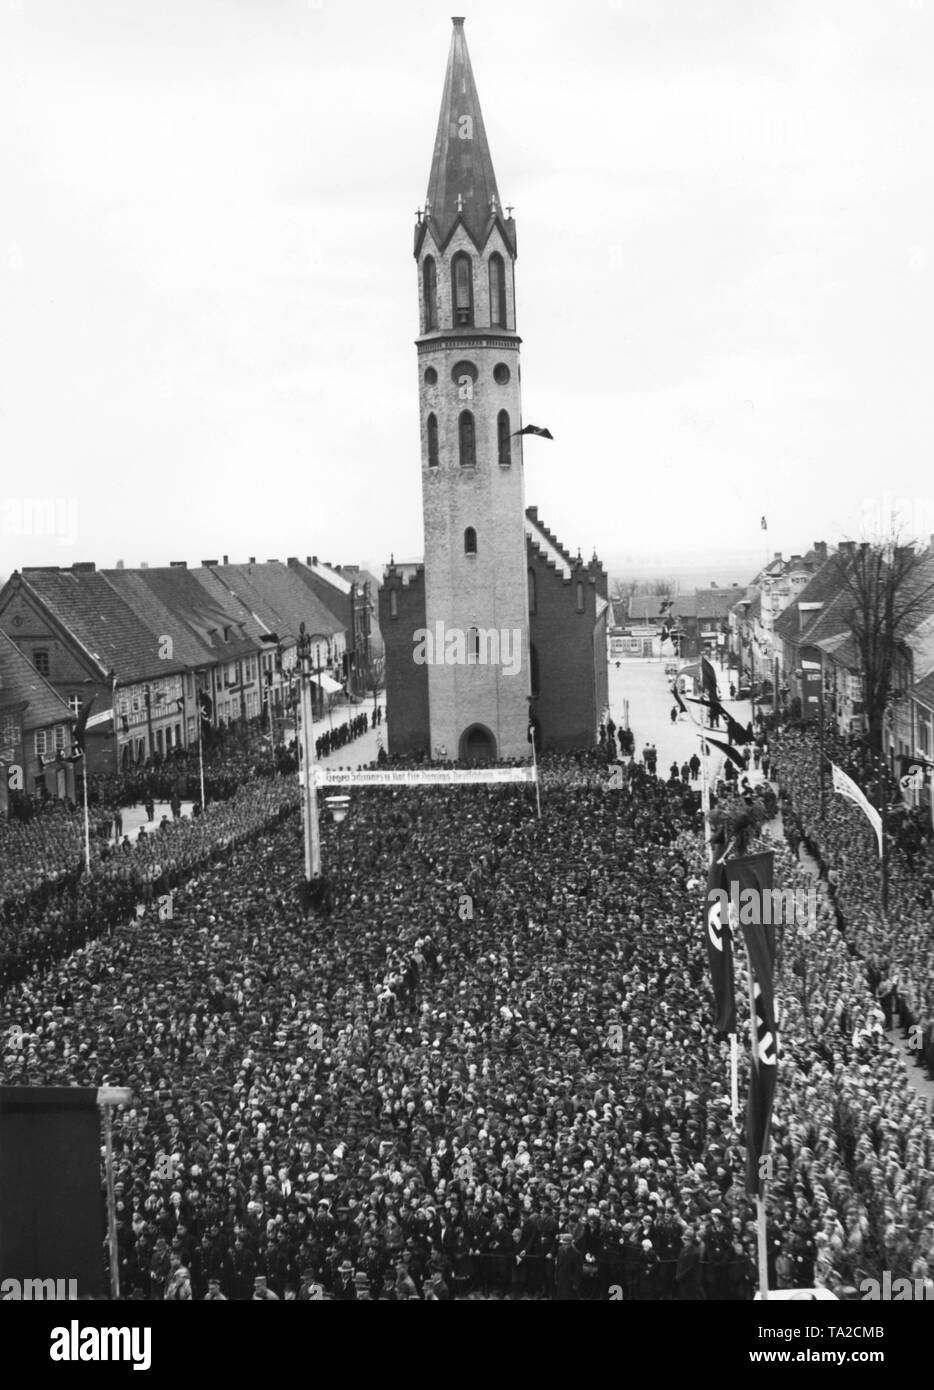 Propaganda Minister Joseph Goebbels speaks to people in Neuteich, a community in Gdansk, on the occasion of the Volkstag (parliamentary) election. Stock Photo